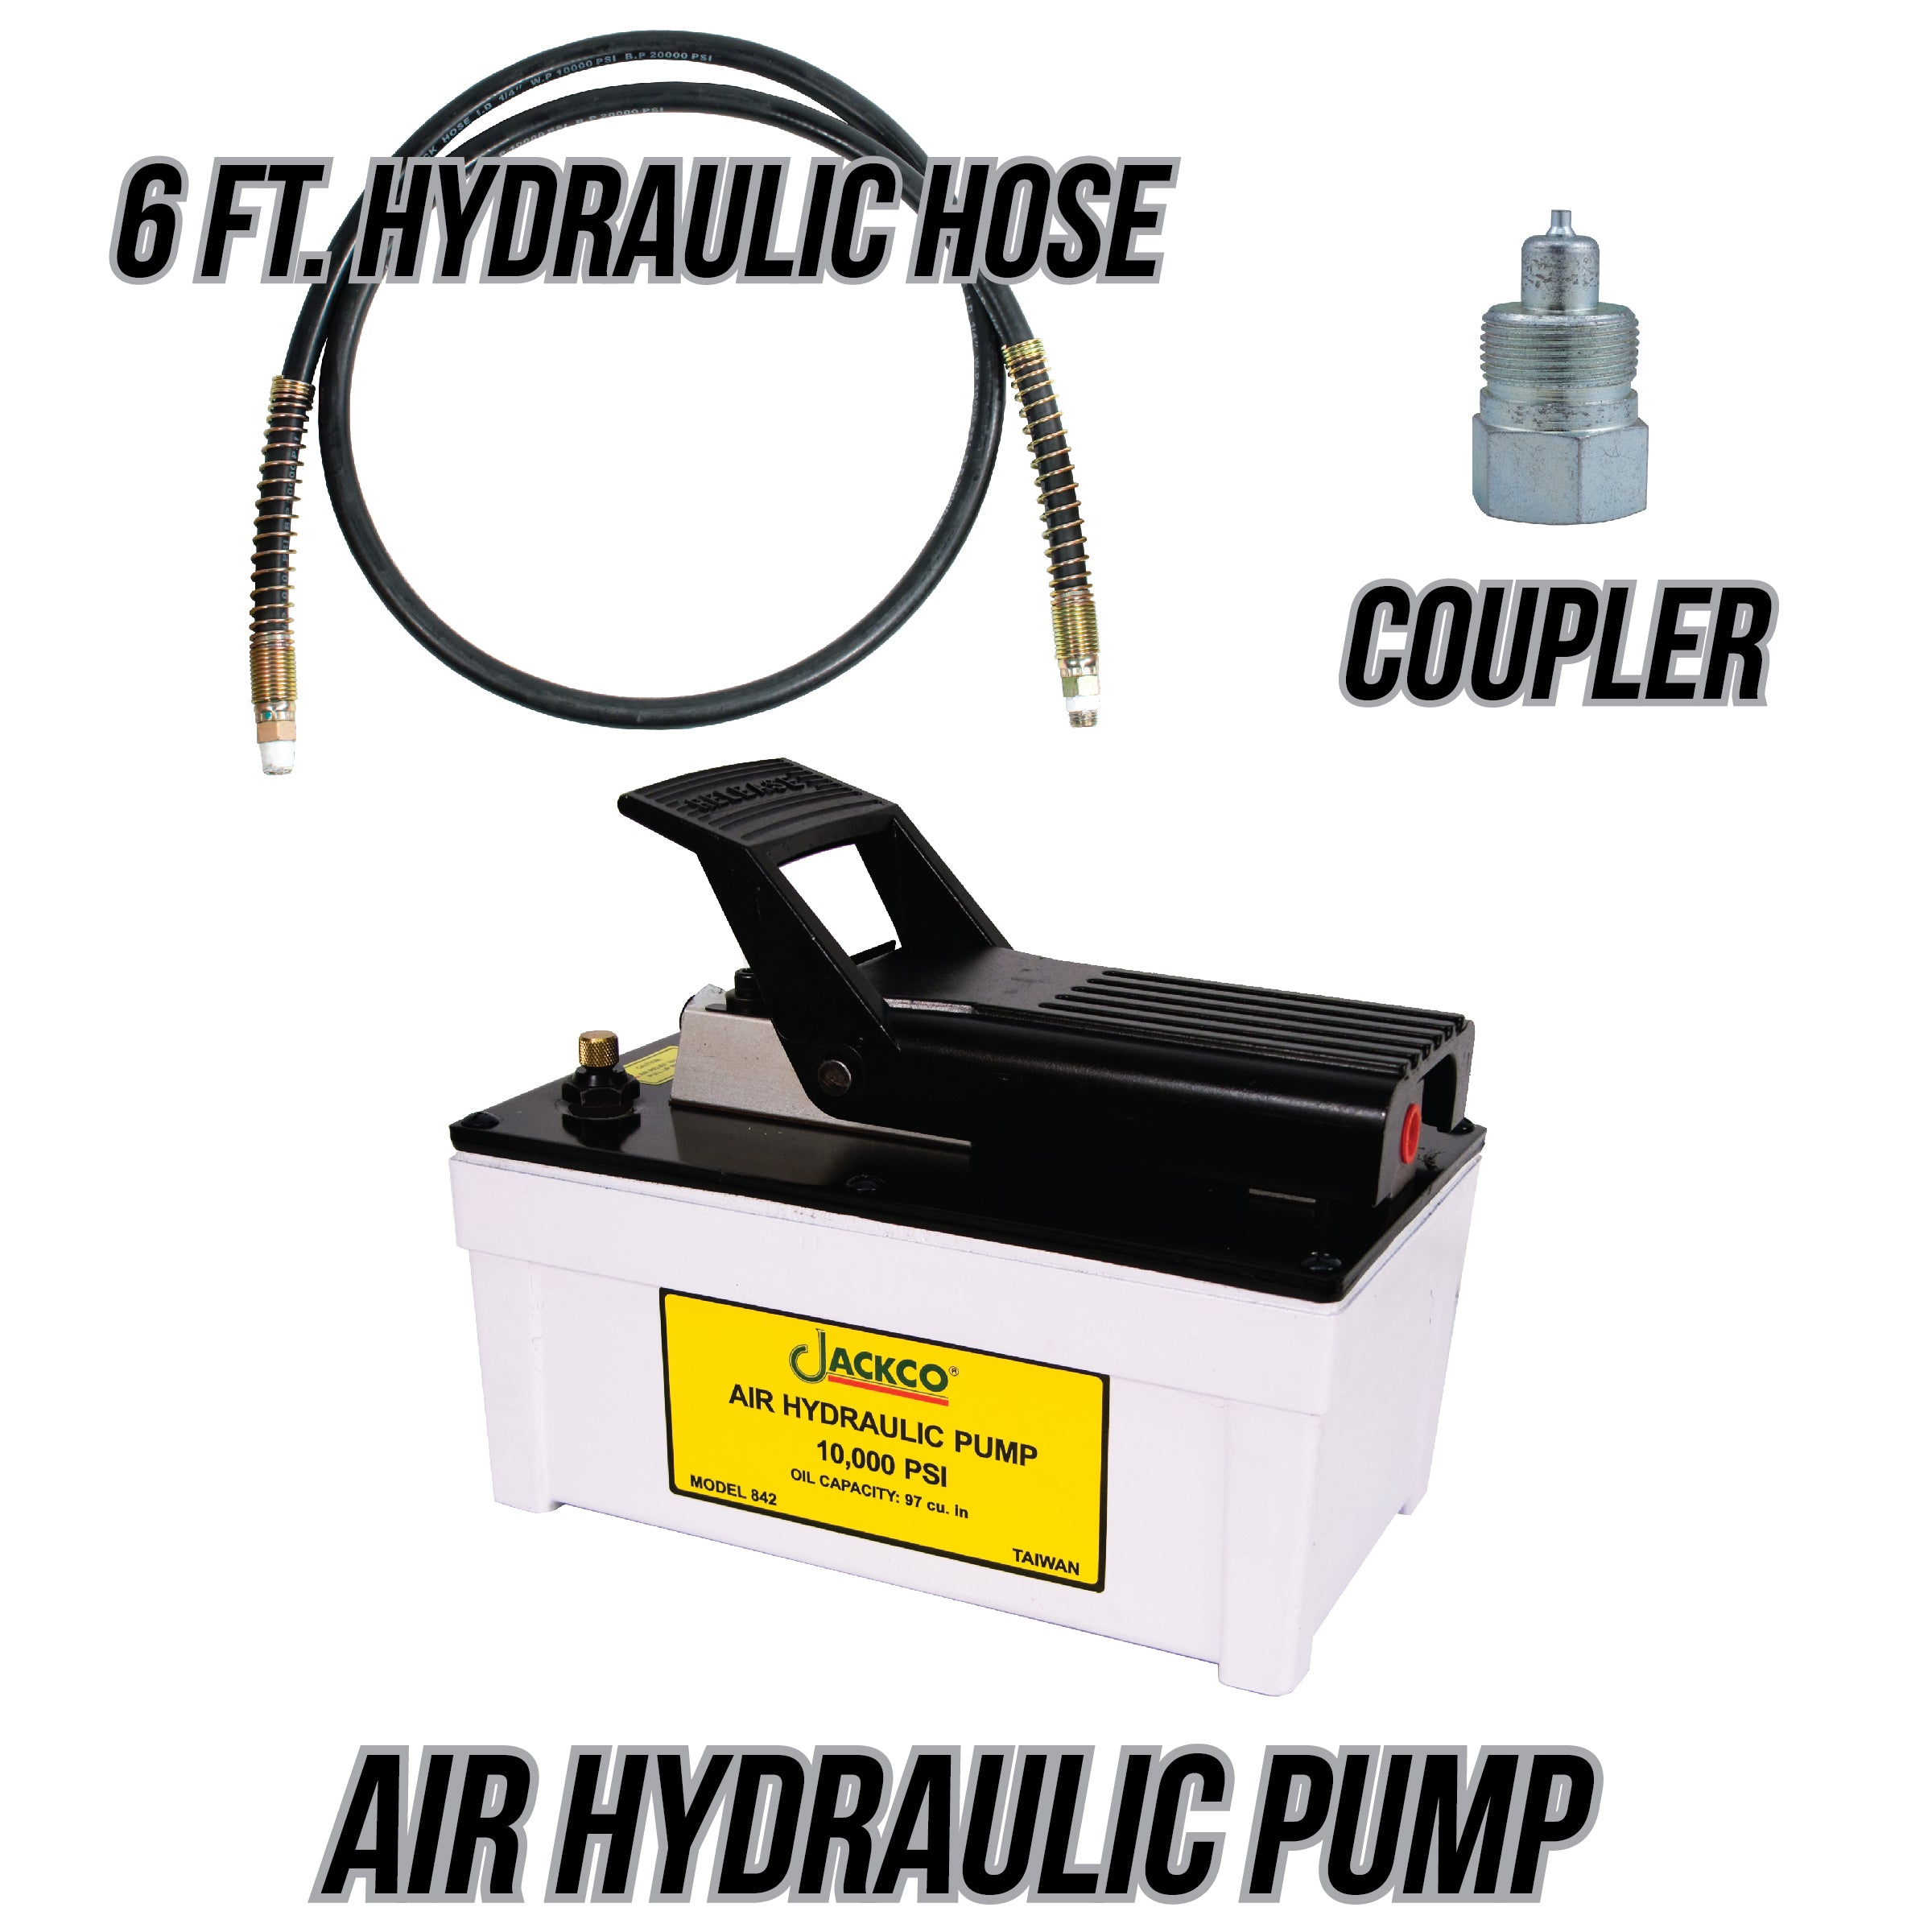 Jackco Air Hydraulic Pump with 6 ft. 10,000 psi Hydraulic Hose and Coupler - Tool Guy Republic